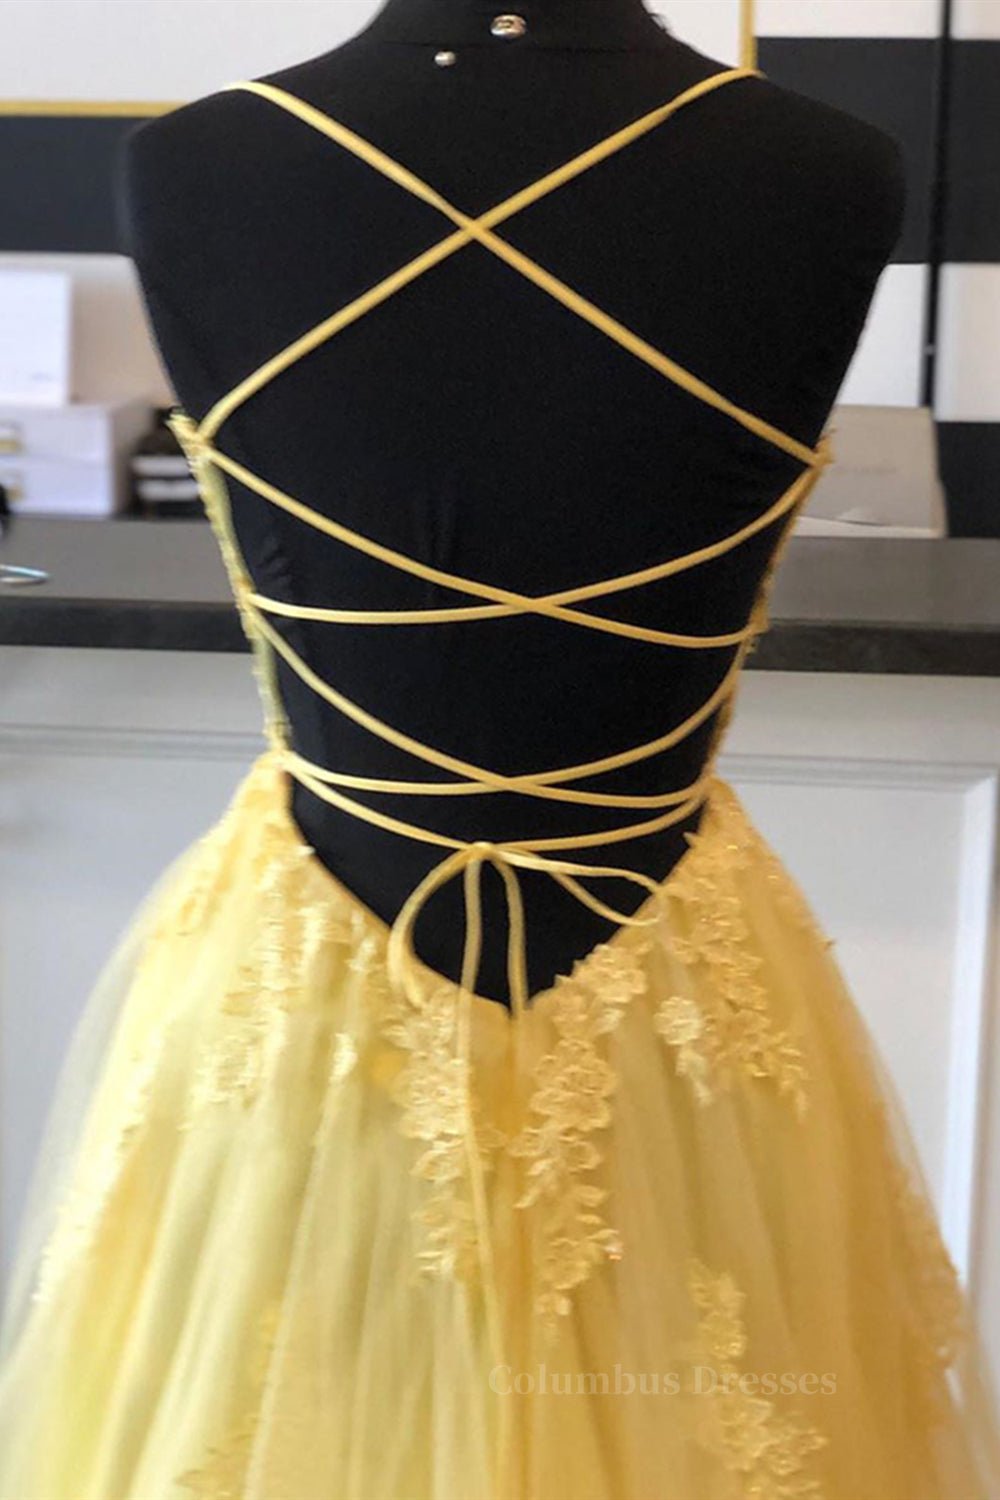 Bridesmaids Dresses Floral, A Line Backless Yellow Lace Floral Long Prom Dress with High Slit, Open Back Yellow Lace Formal Dress, Yellow Lace Evening Dress